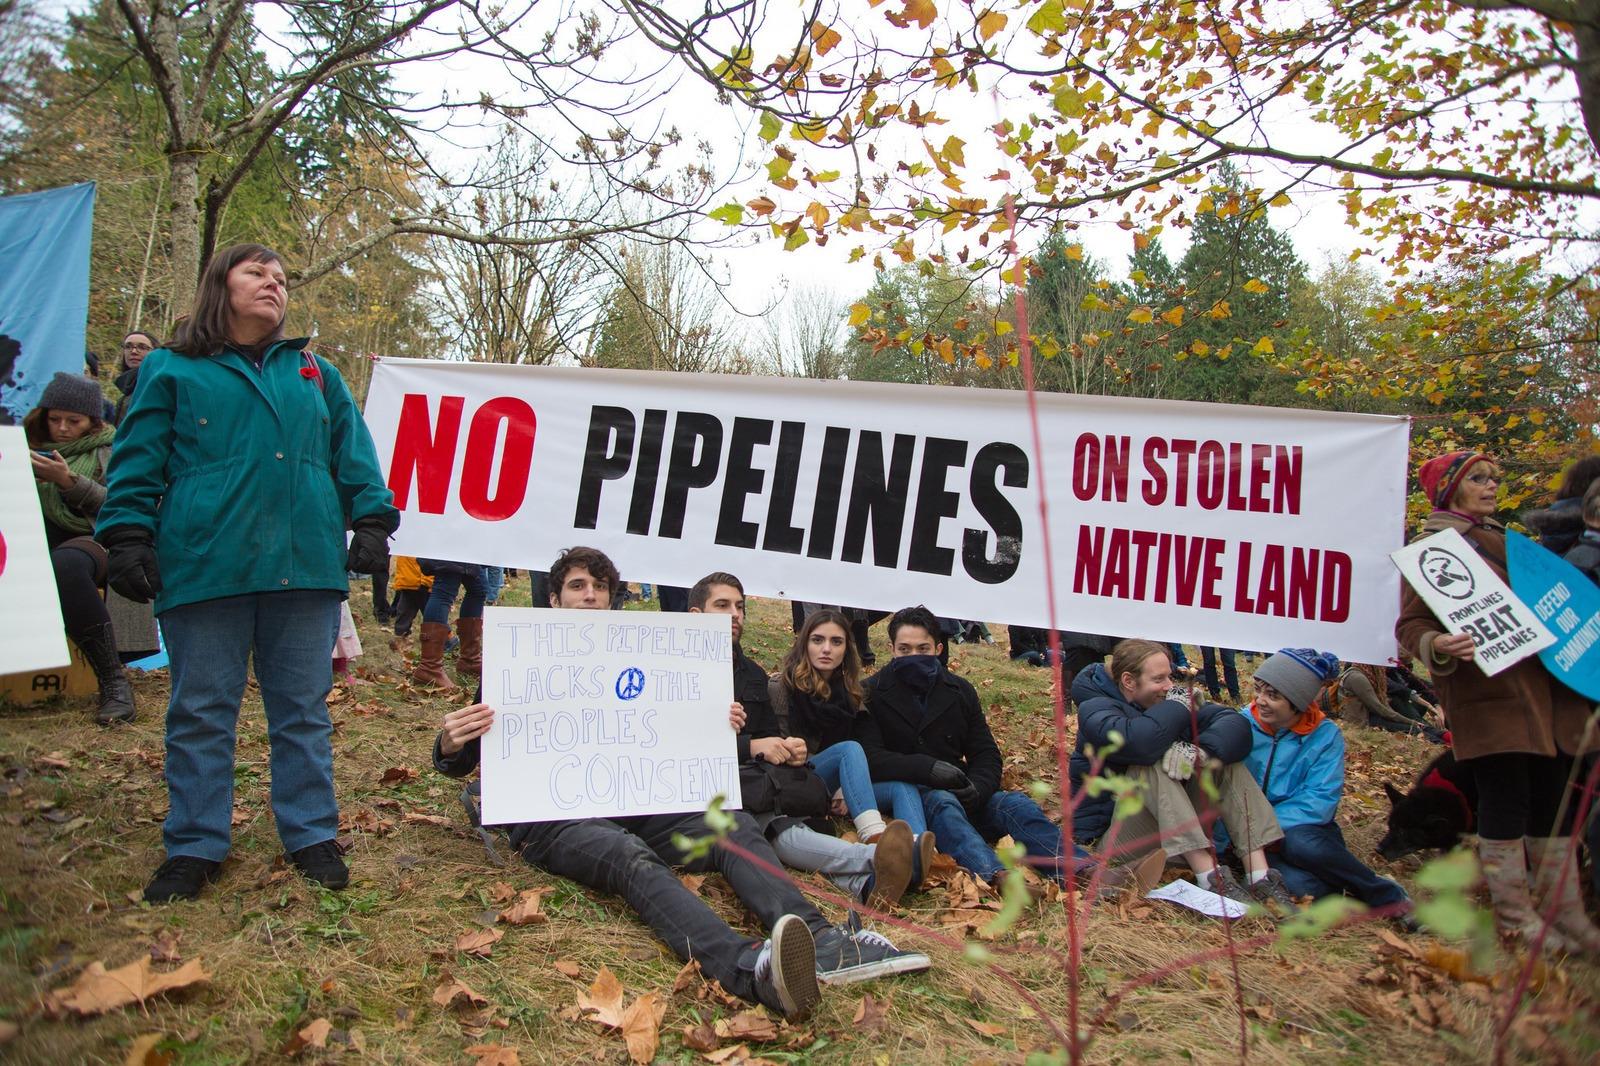 Protestors hold up signs at a rally against a proposed Kinder Morgan oil pipeline expansion on Burnaby Mountain in 2014 in British Columbia. In late May, the Canadian government announced it would fund an expansion project for the Kinder Morgan Trans Moun